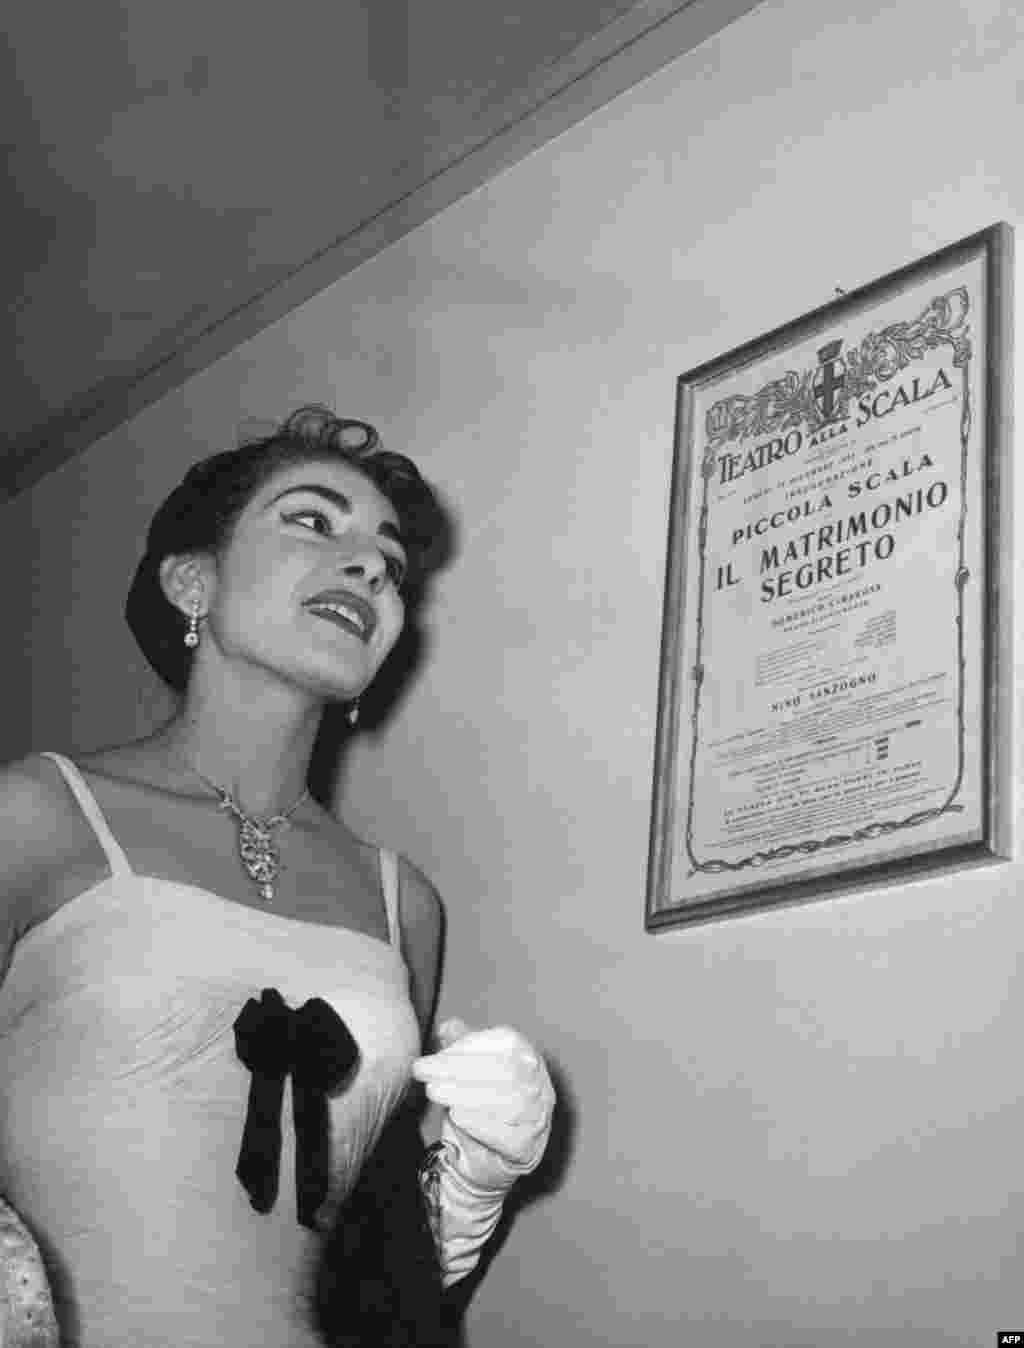 Maria Callas at the inauguration of the so-called &quot;Little Scala&quot; or &quot;Piccola Scala&quot; hall of Milan&#39;s La Scala opera house on December 26, 1955